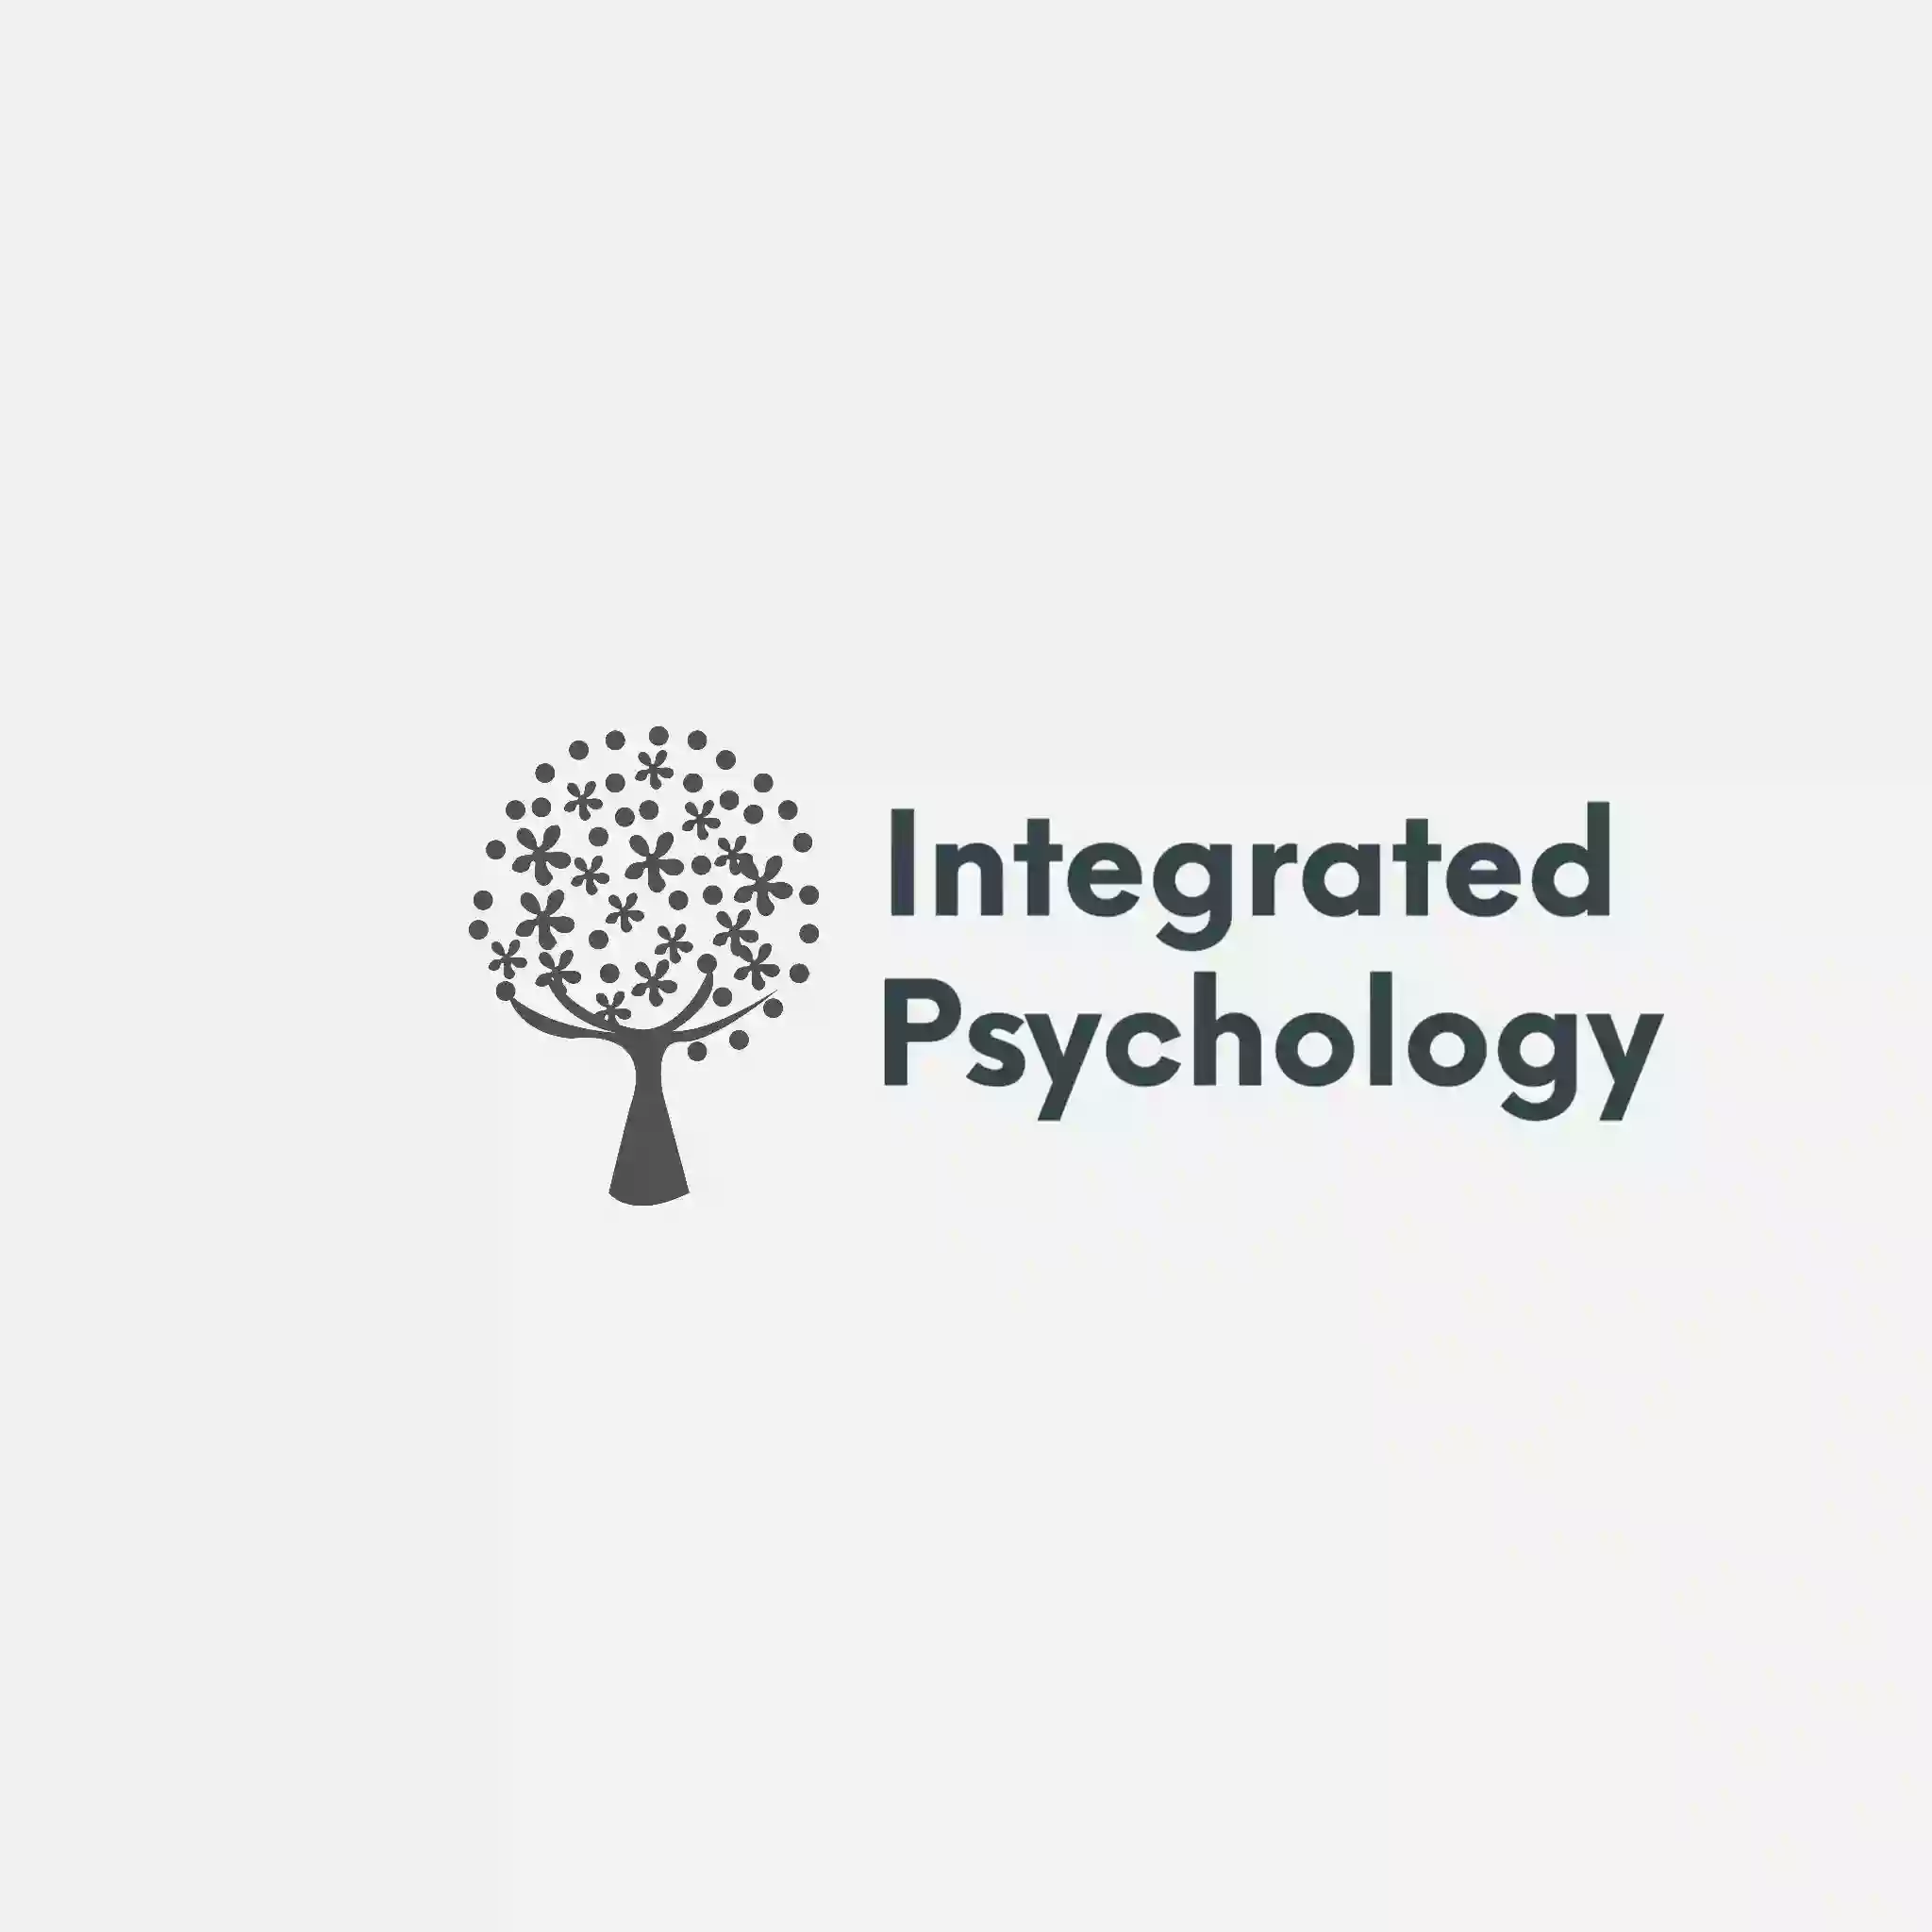 Integrated Psychology